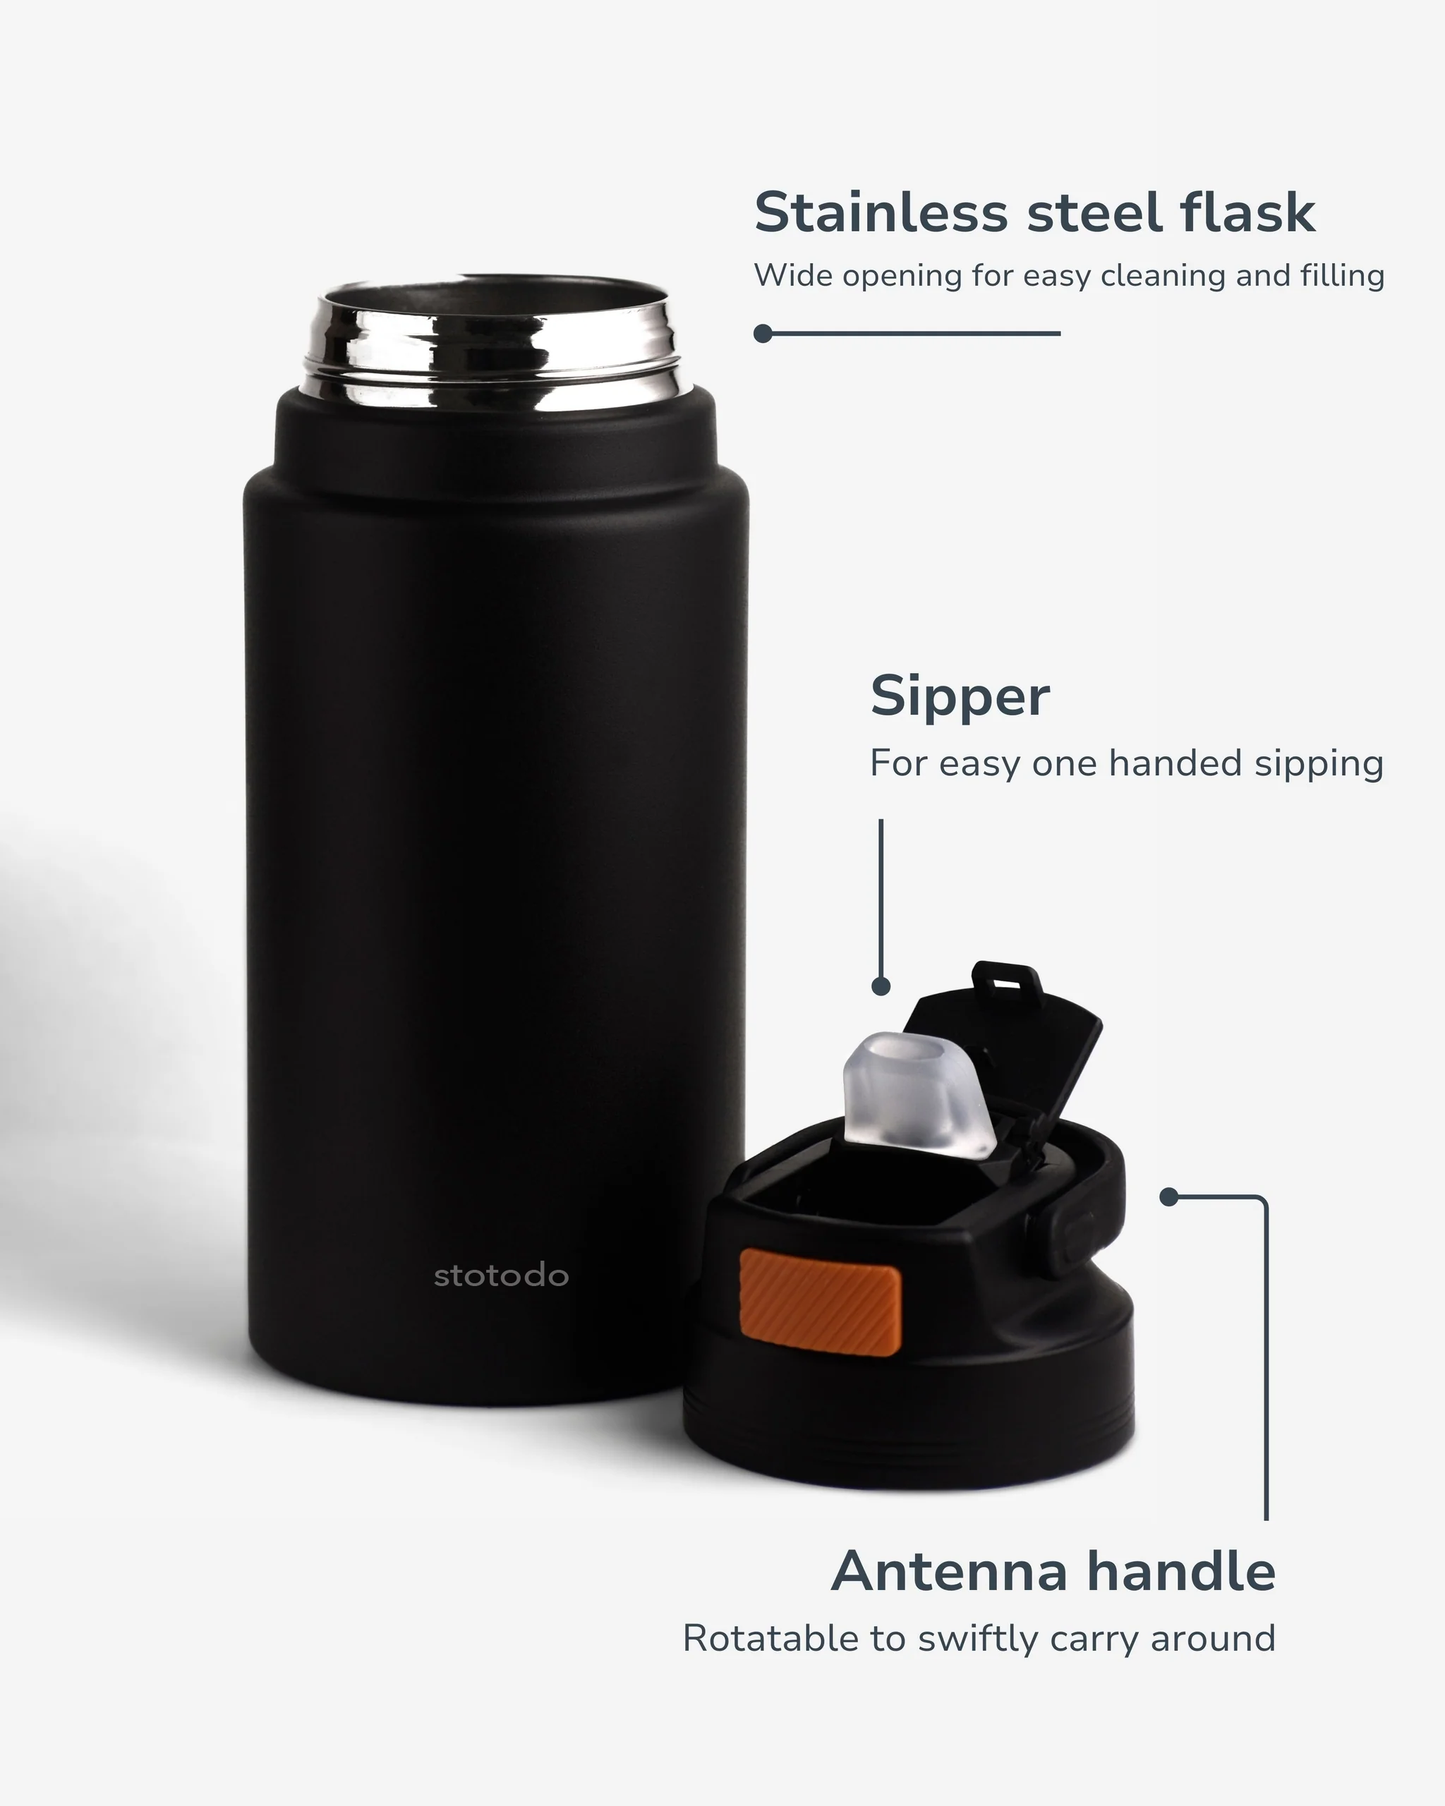 Droid sipper flask